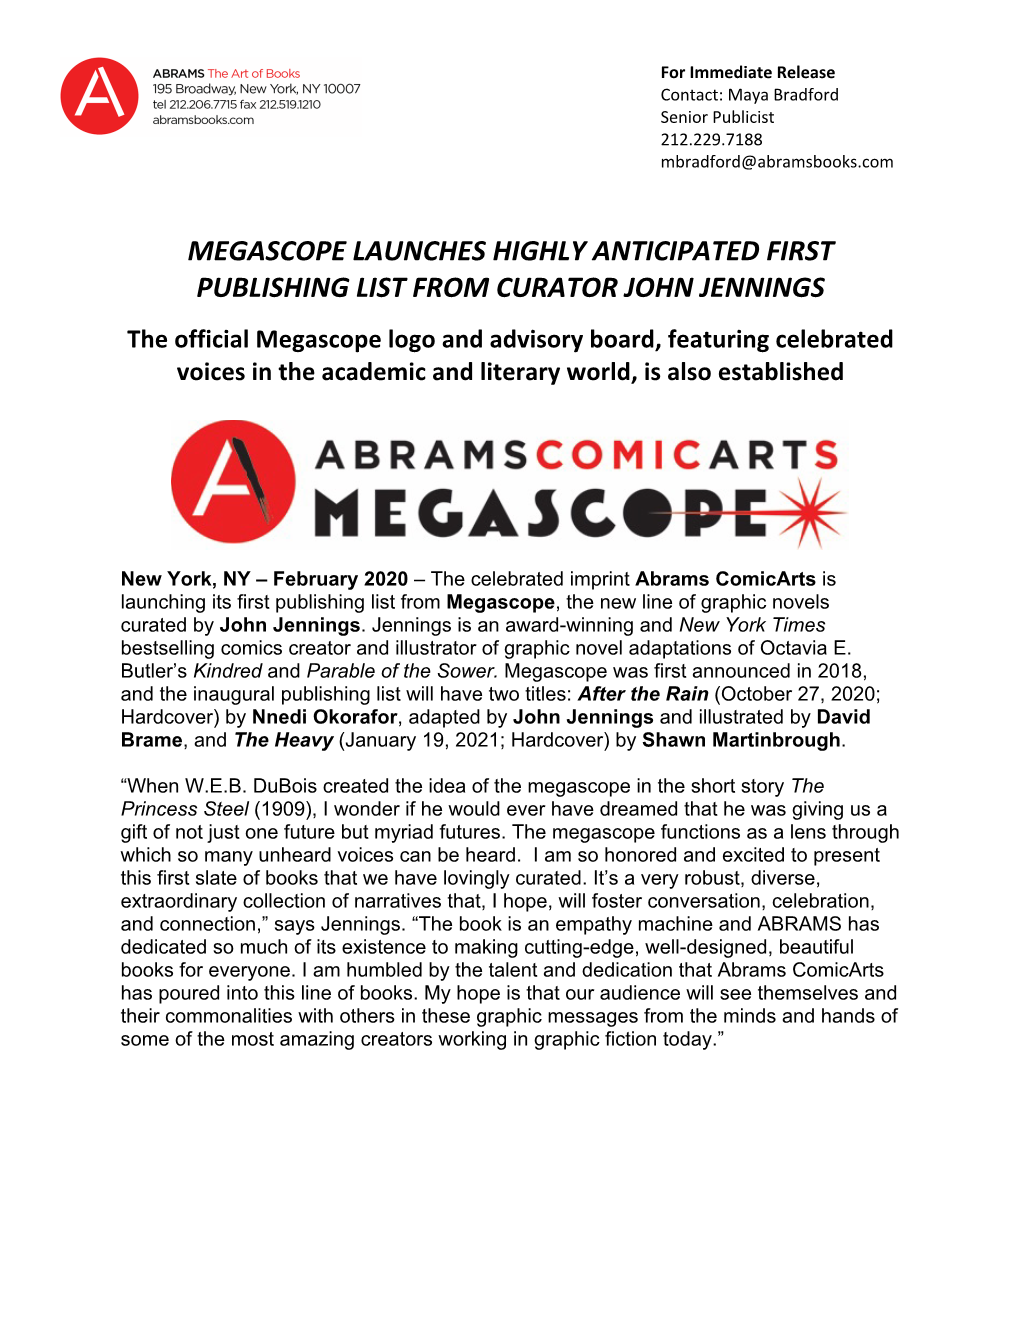 Megascope Launches Highly Anticipated First Publishing List from Curator John Jennings